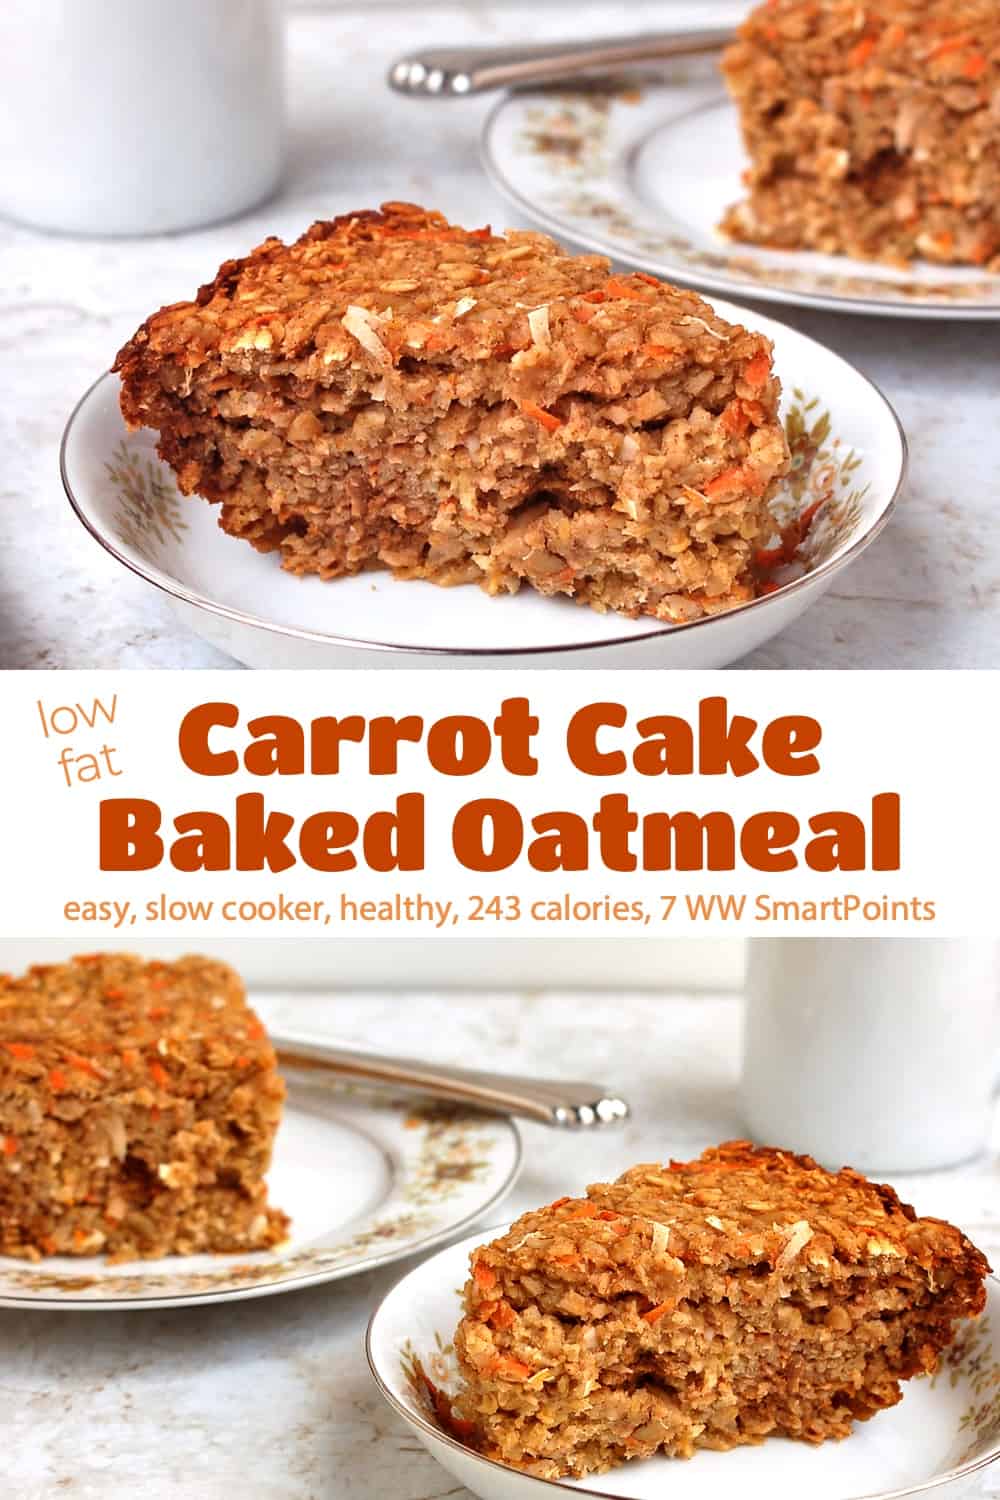 Slice of Carrot Cake Baked Oatmeal in a white bowl